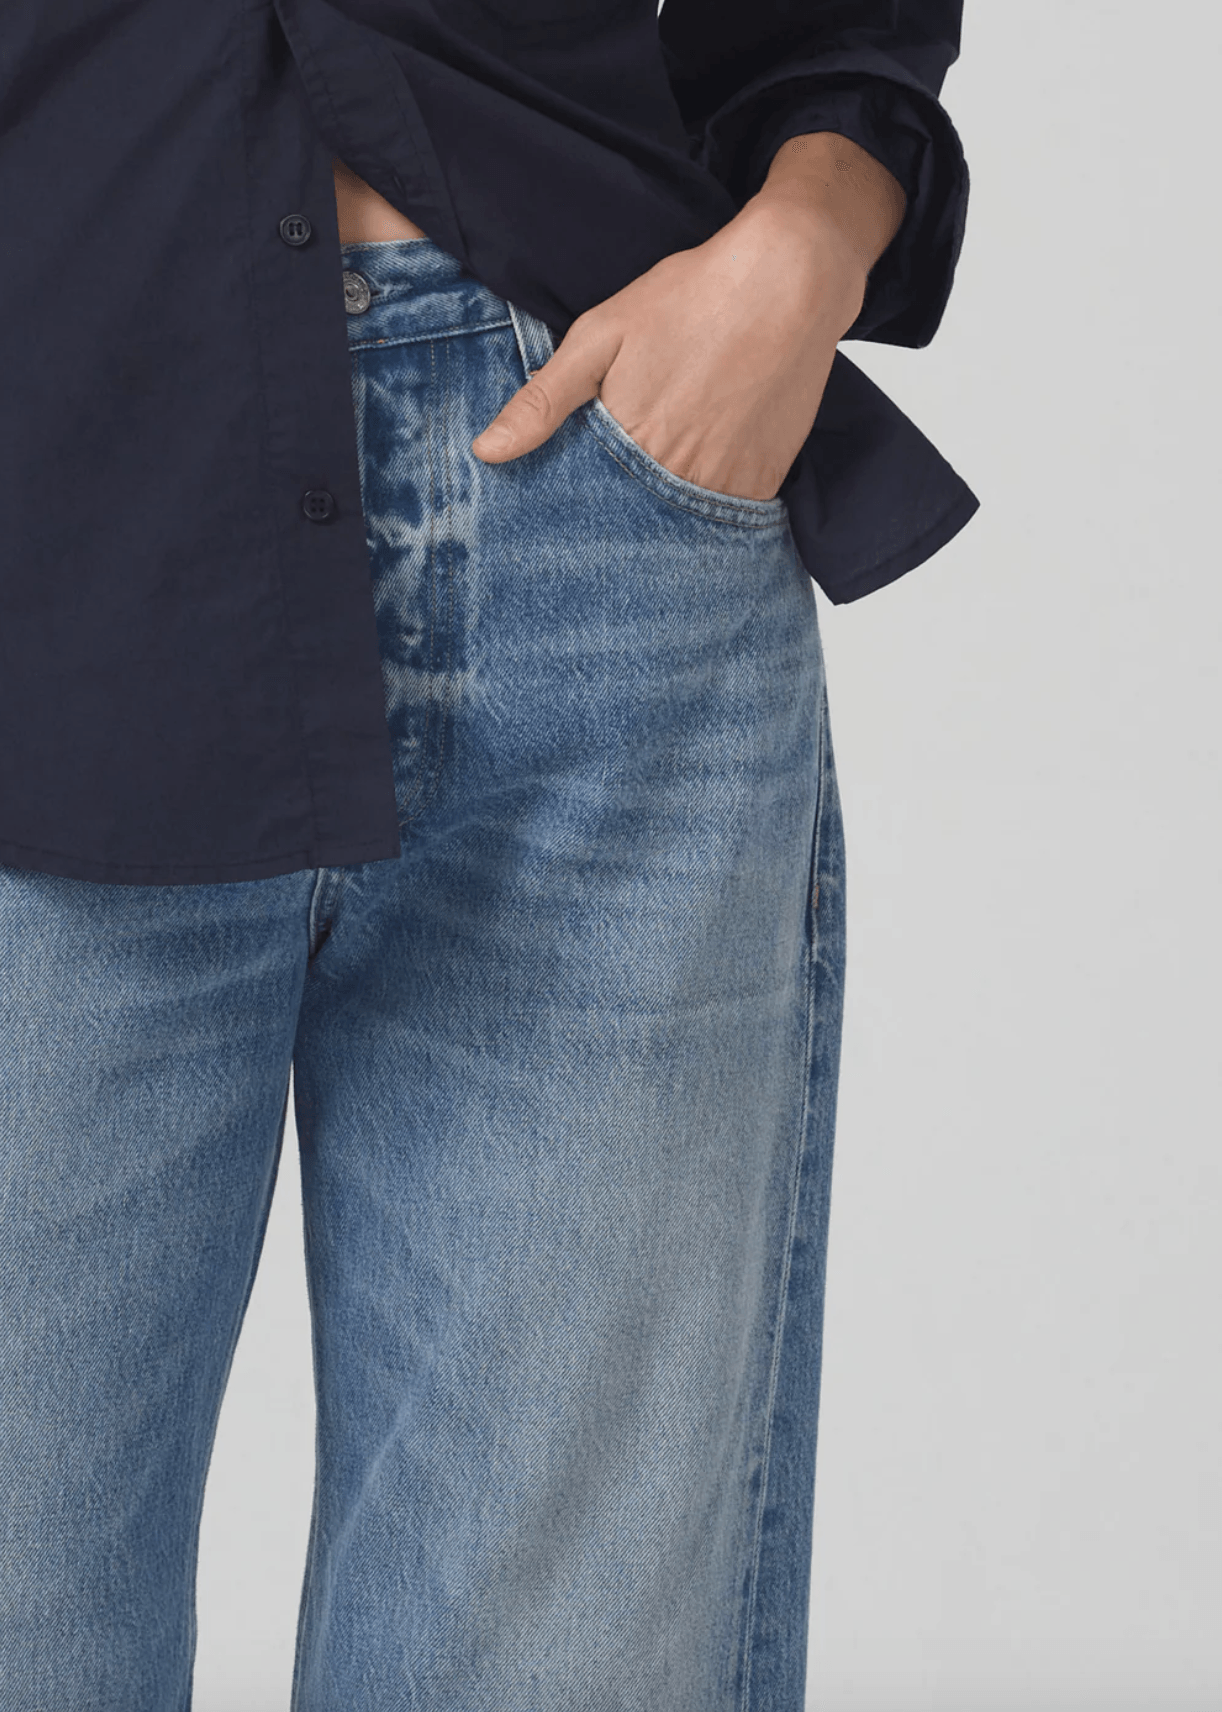 Citizens of Humanity - Gaucho Vintage Soda Pop Wide-Leg Jeans - 32 The Guild